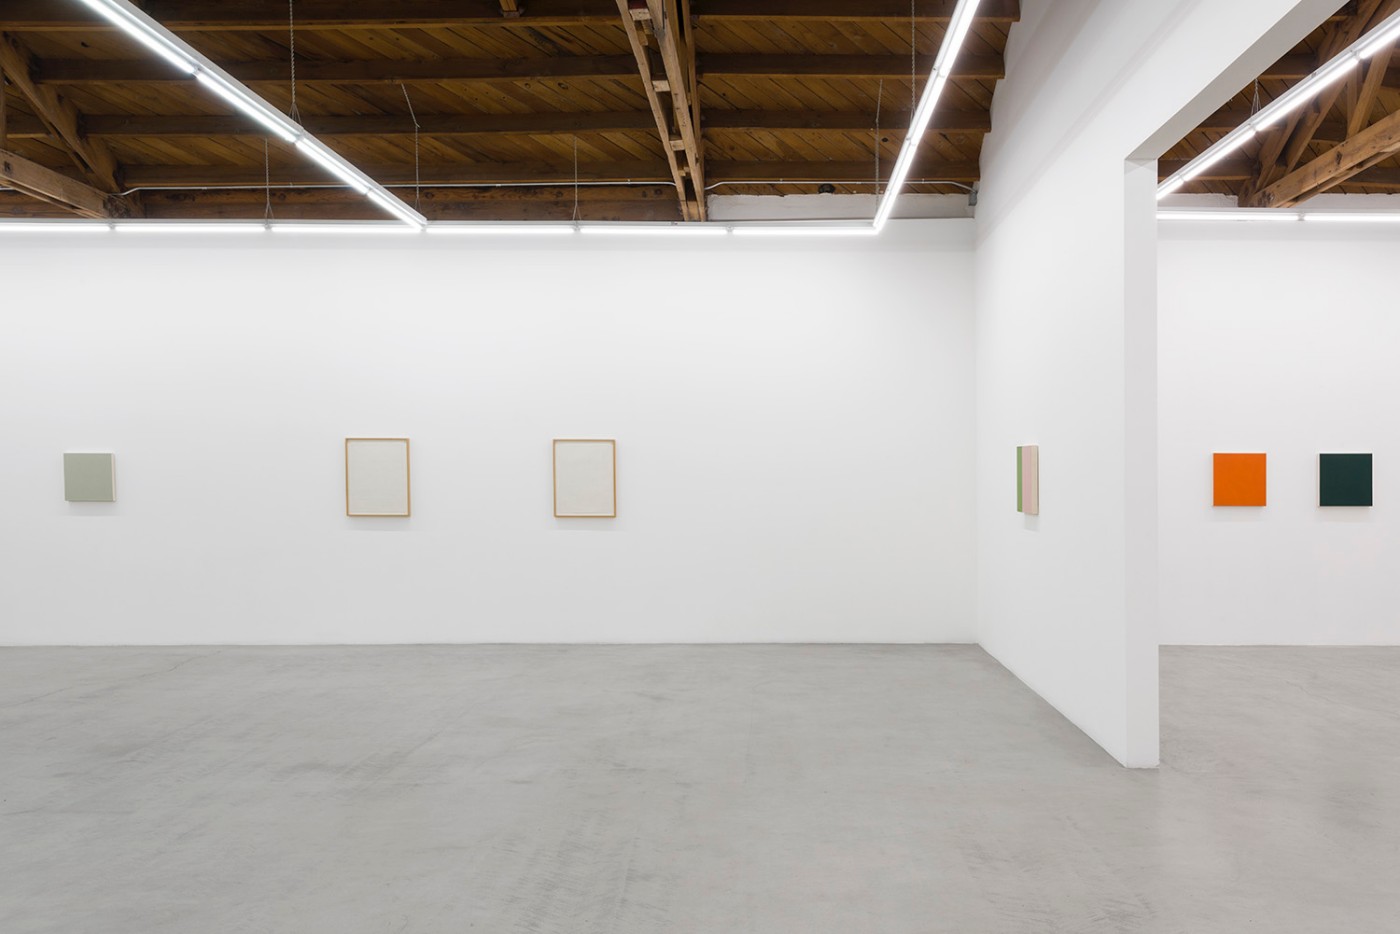 Installation image for Marcia Hafif: Paintings, 2000 - 2014, at parrasch heijnen